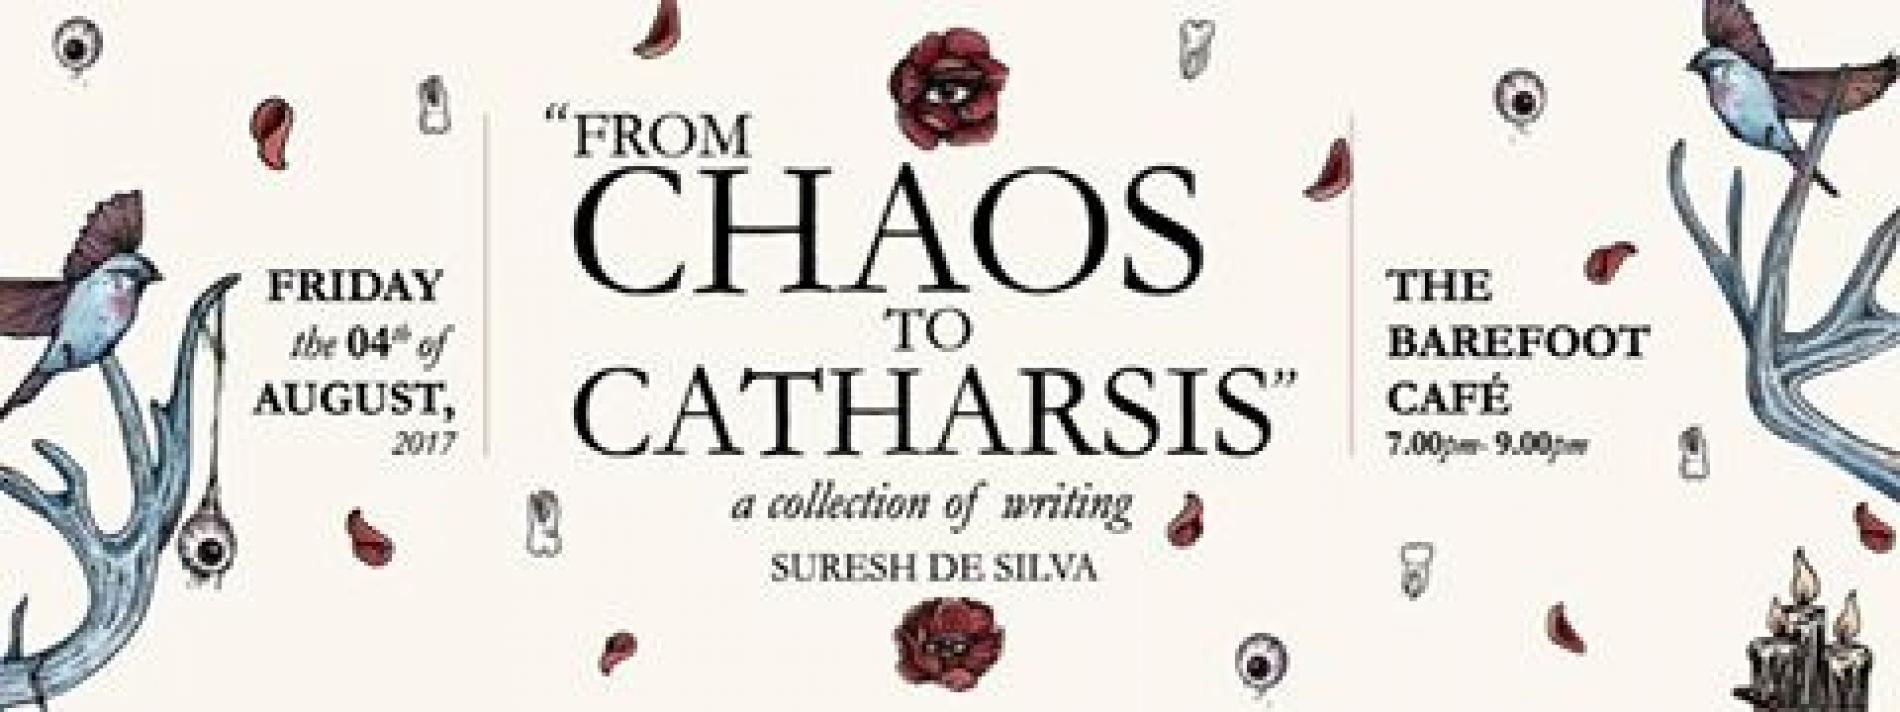 From Chaos To Catharsis